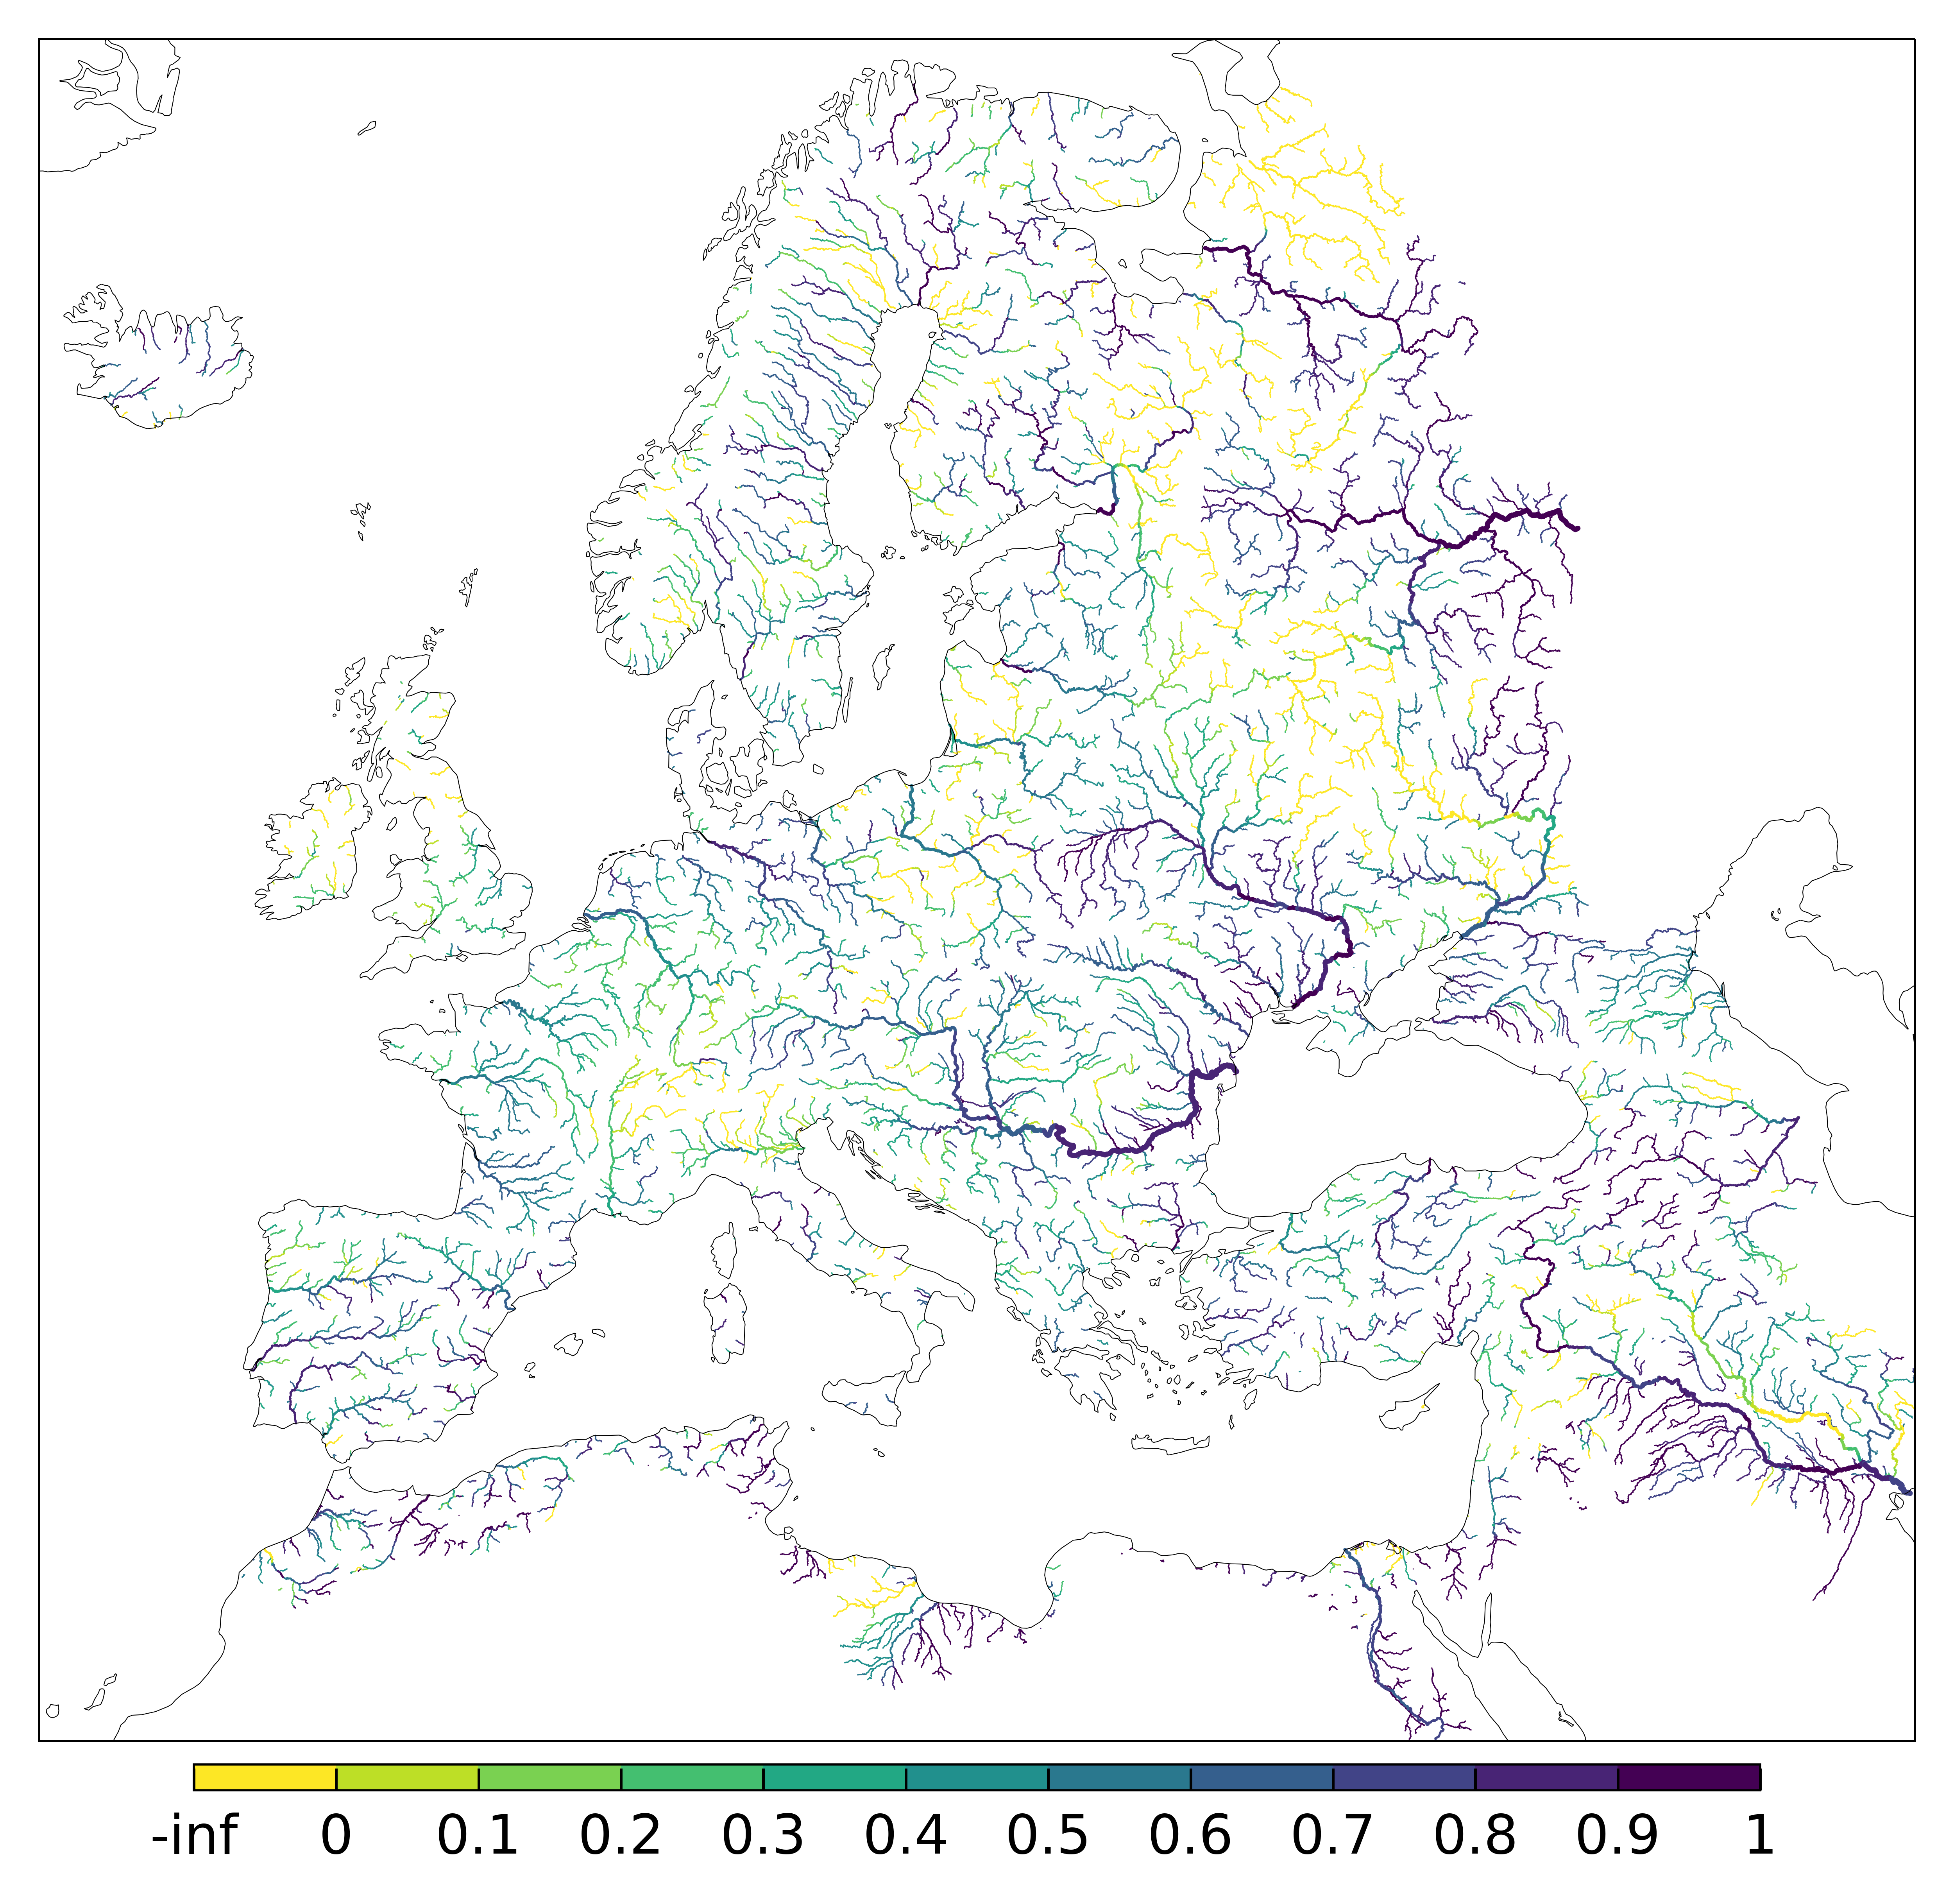 Figure 4. EFAS CRPSS at lead-time 10 day for February 2024 across the EFAS domain for catchments larger than 1000km2. Climatology is used as the reference forecast.